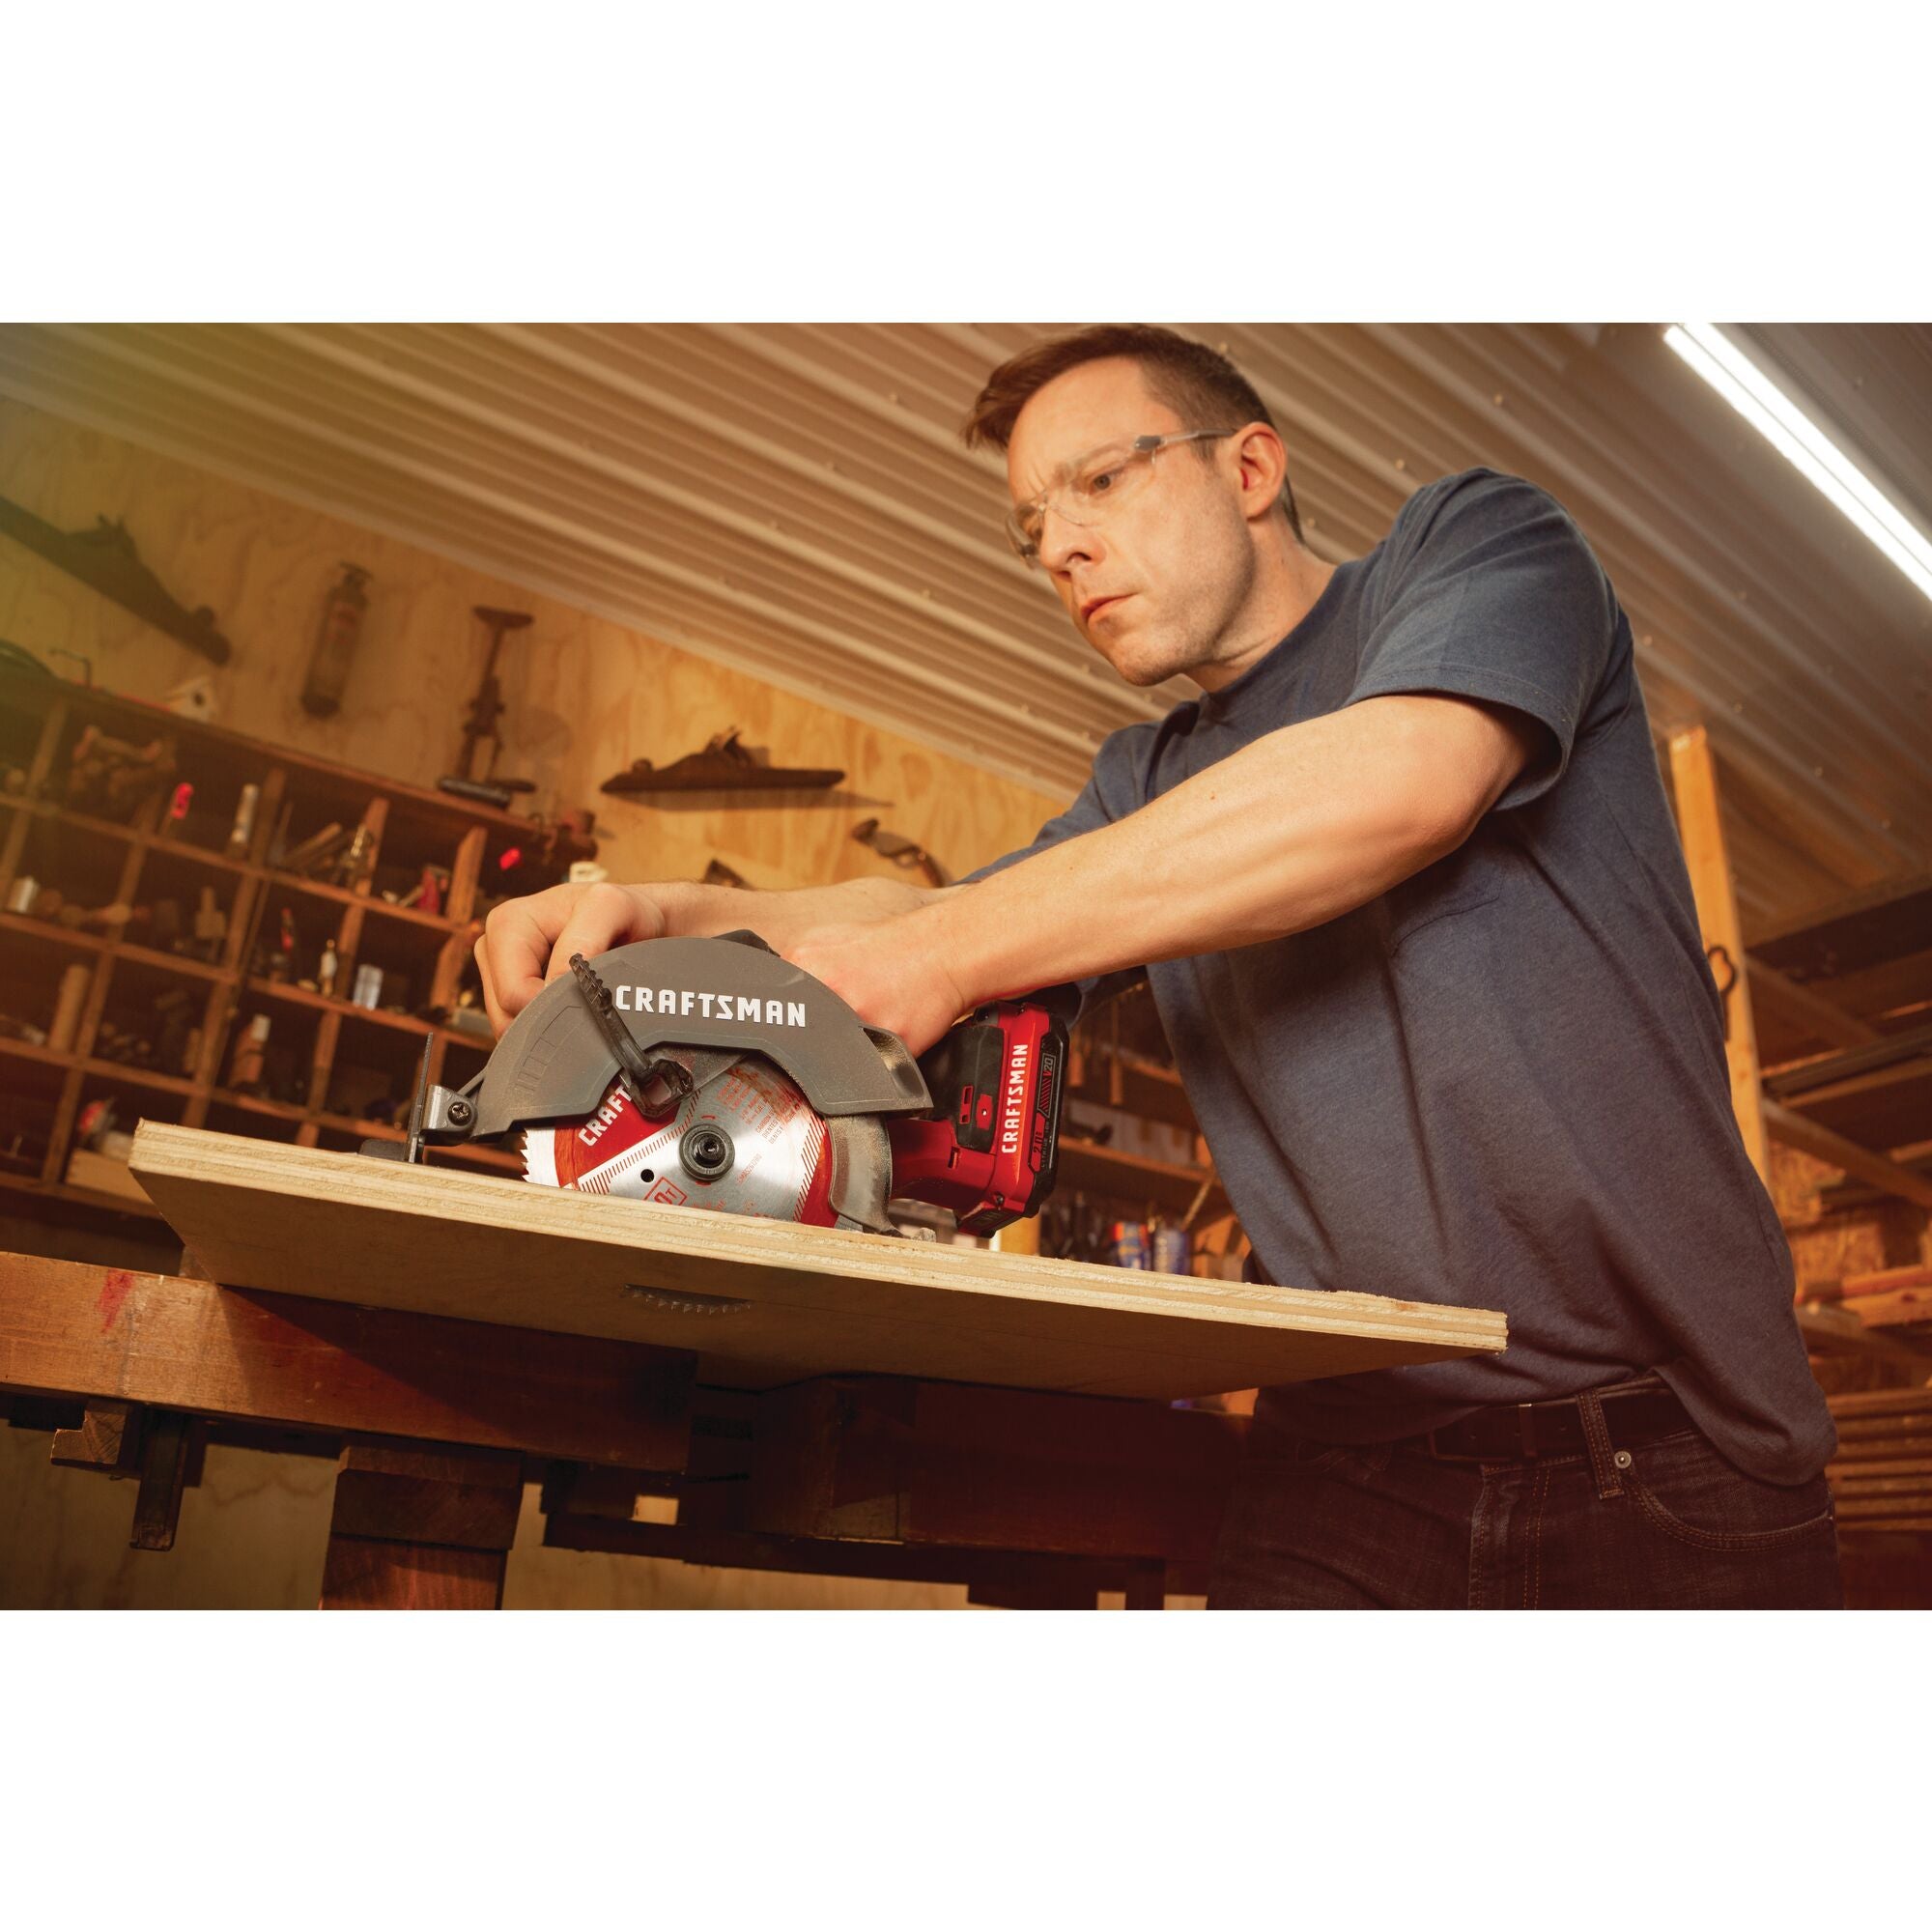 20V 6-1/2 Circular Saw Kit with Li-Ion Battery (Charger Not